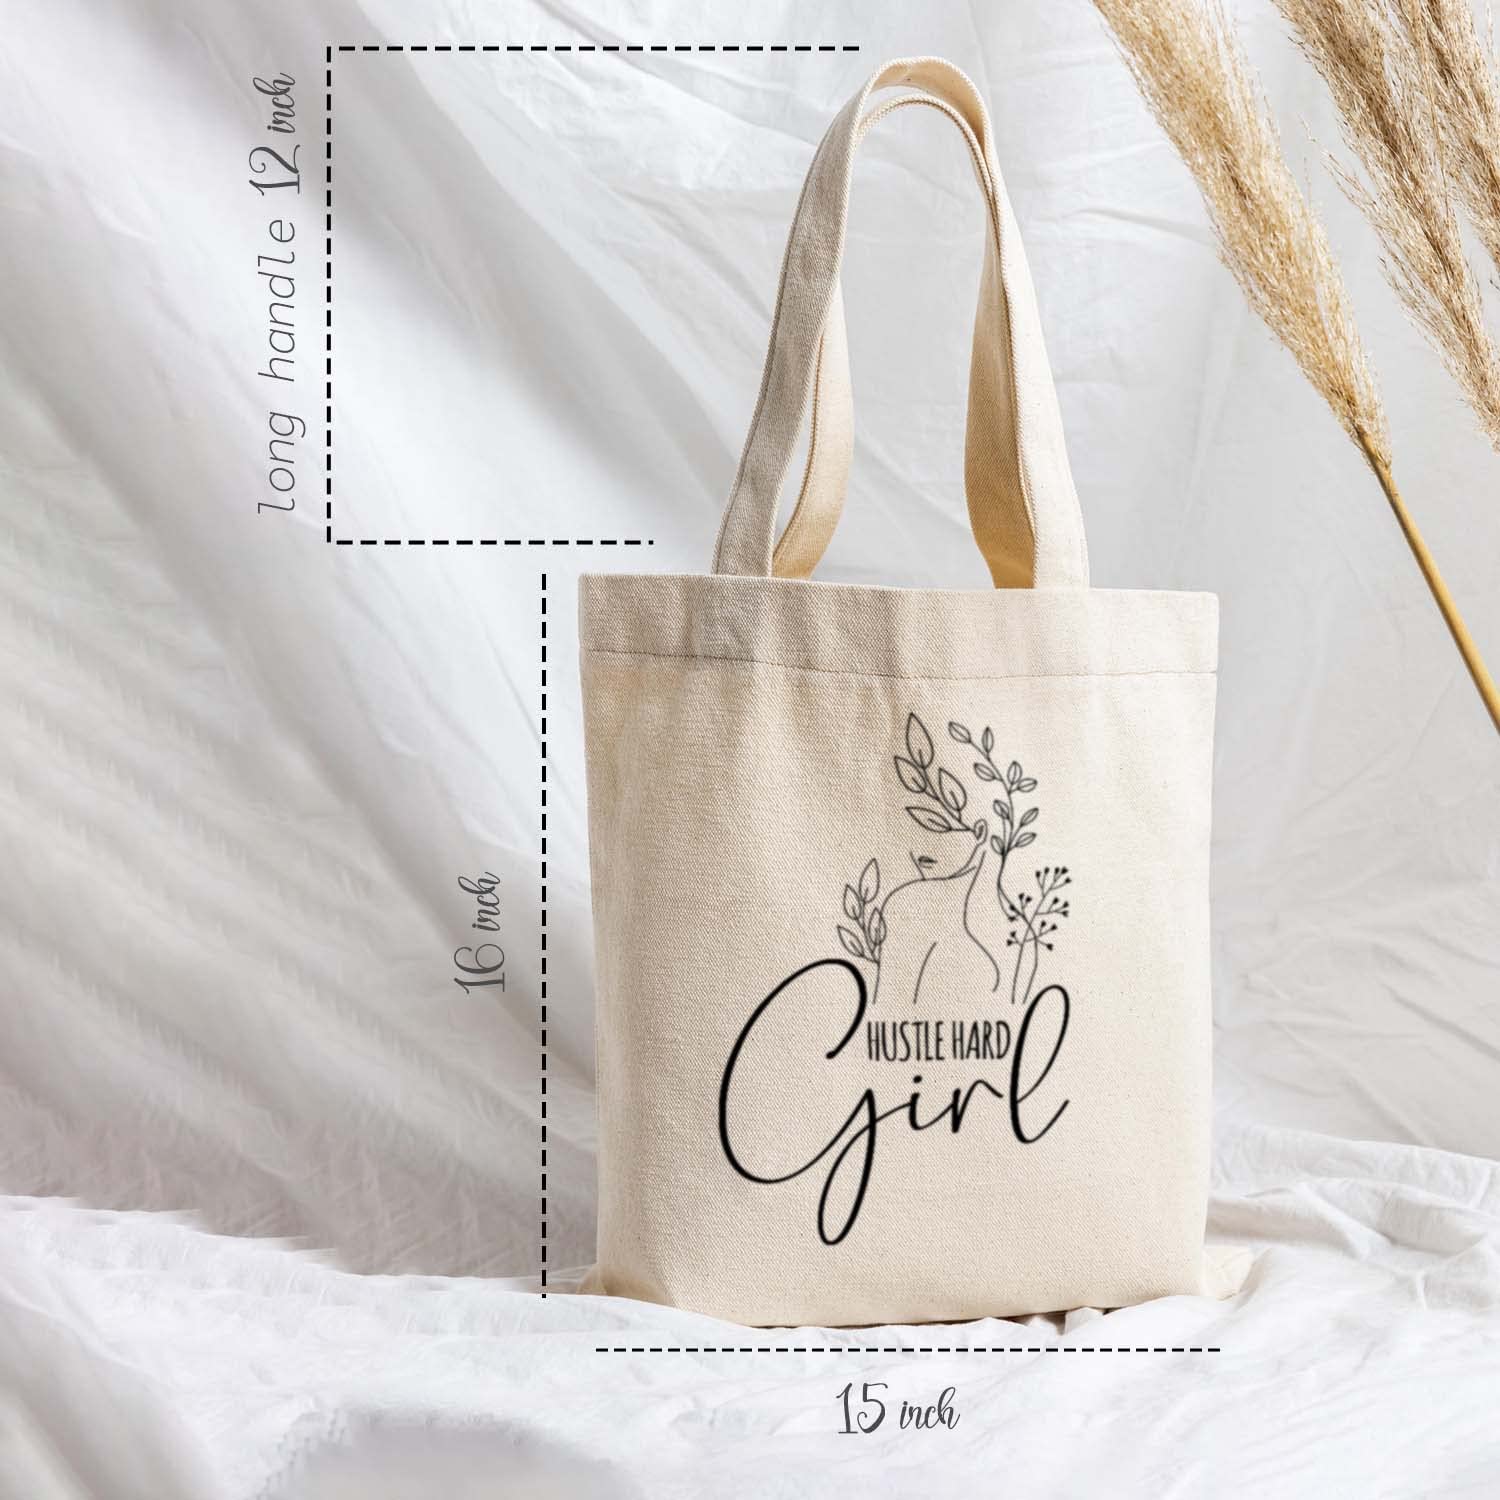 Buy High Quality Canvas Tote Bags W/gusset Online in India - Etsy